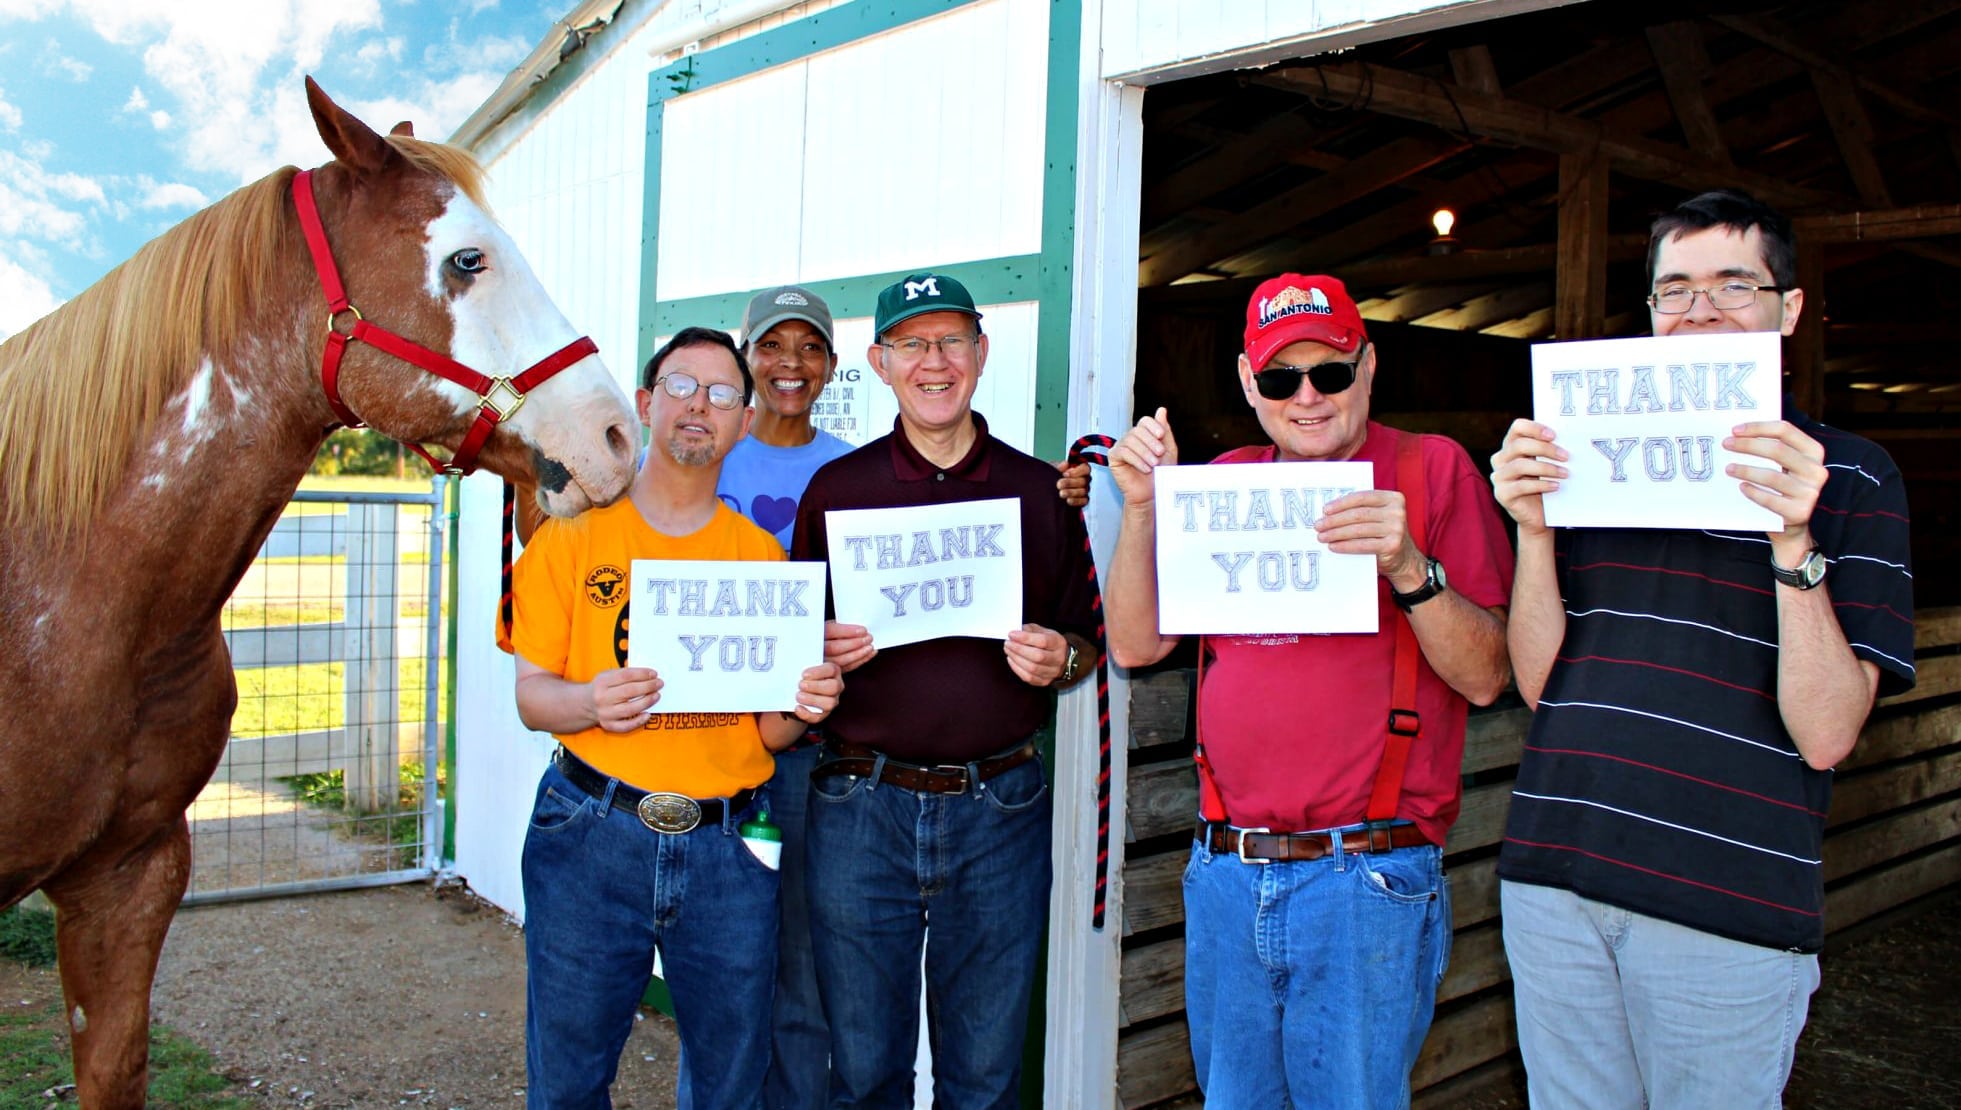 Four residents holding signs that say Thank You standing next to a volunteer and a horse.